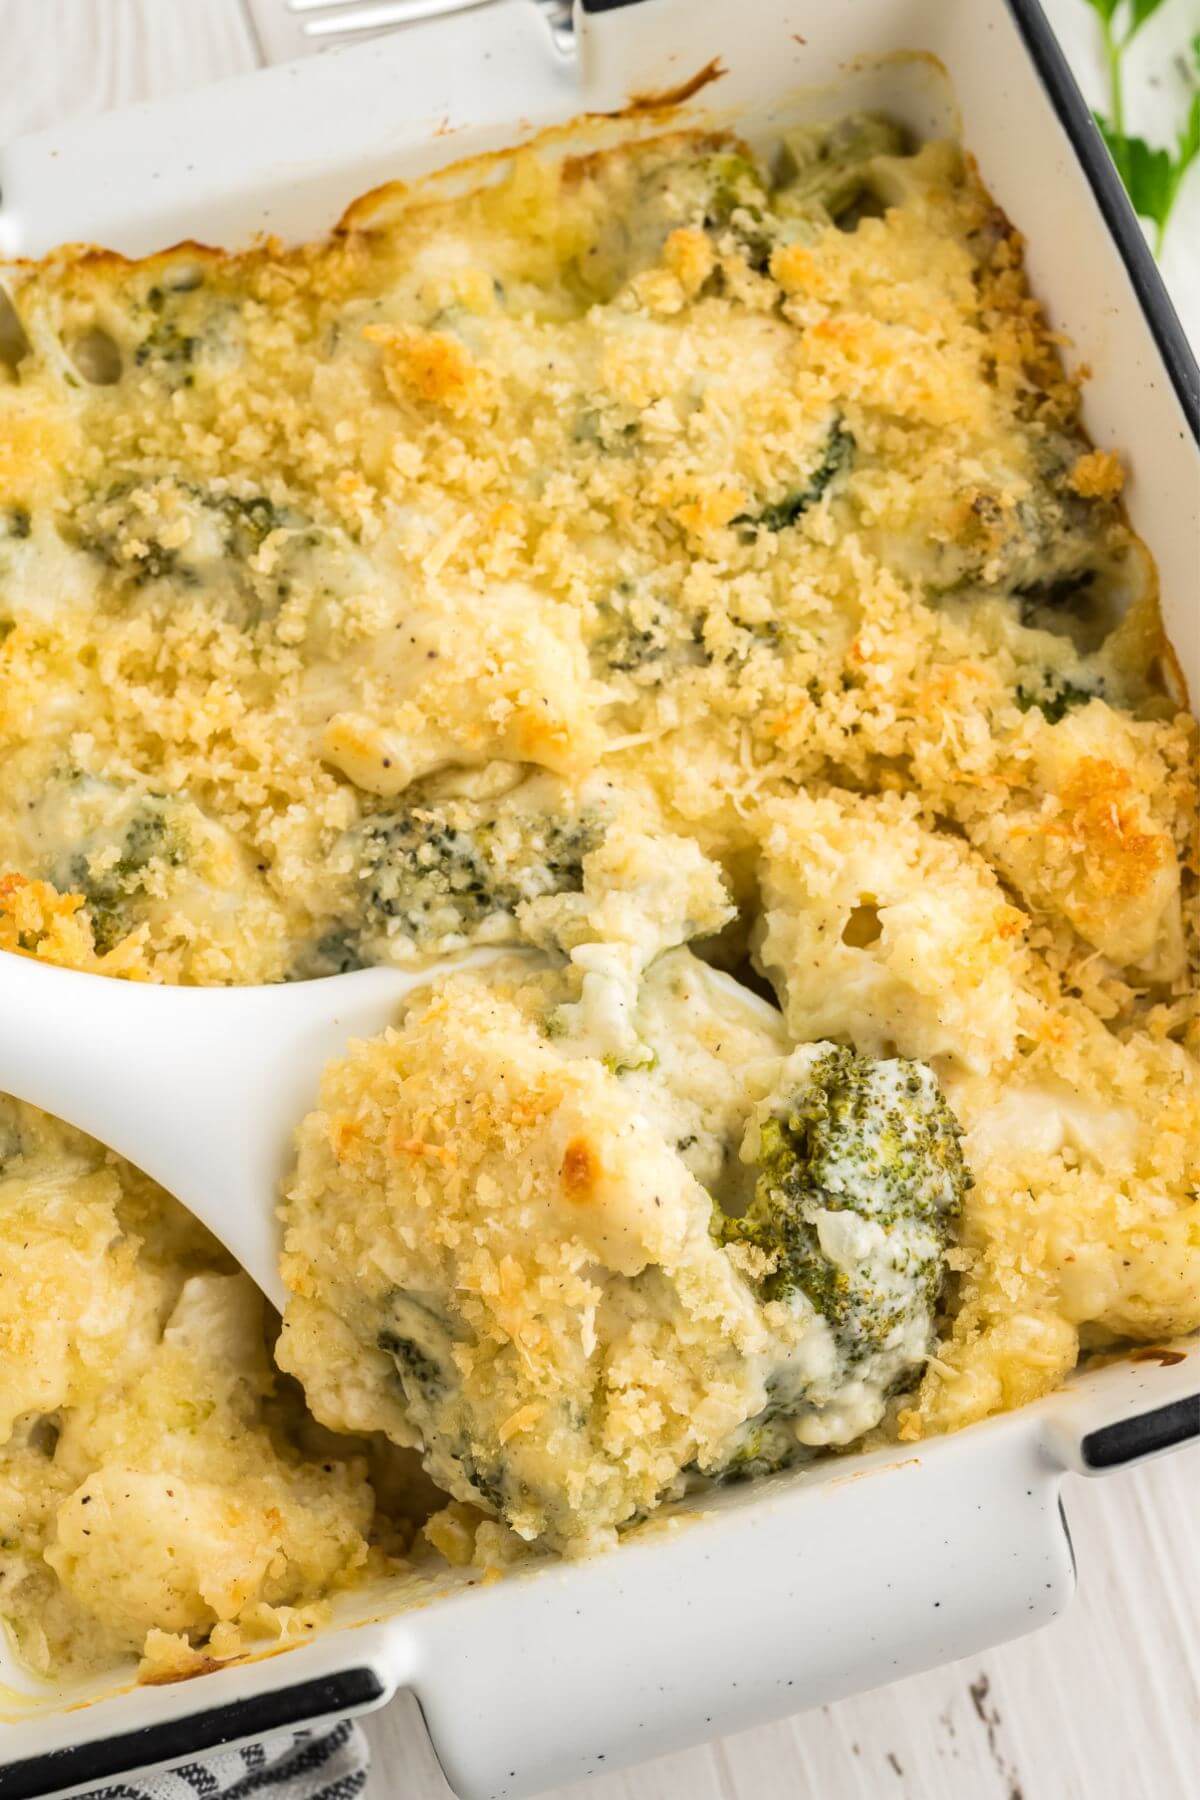 There is a spoon about to lift some Cheesy Broccoli Cauliflower Casserole out of the casserole dish.